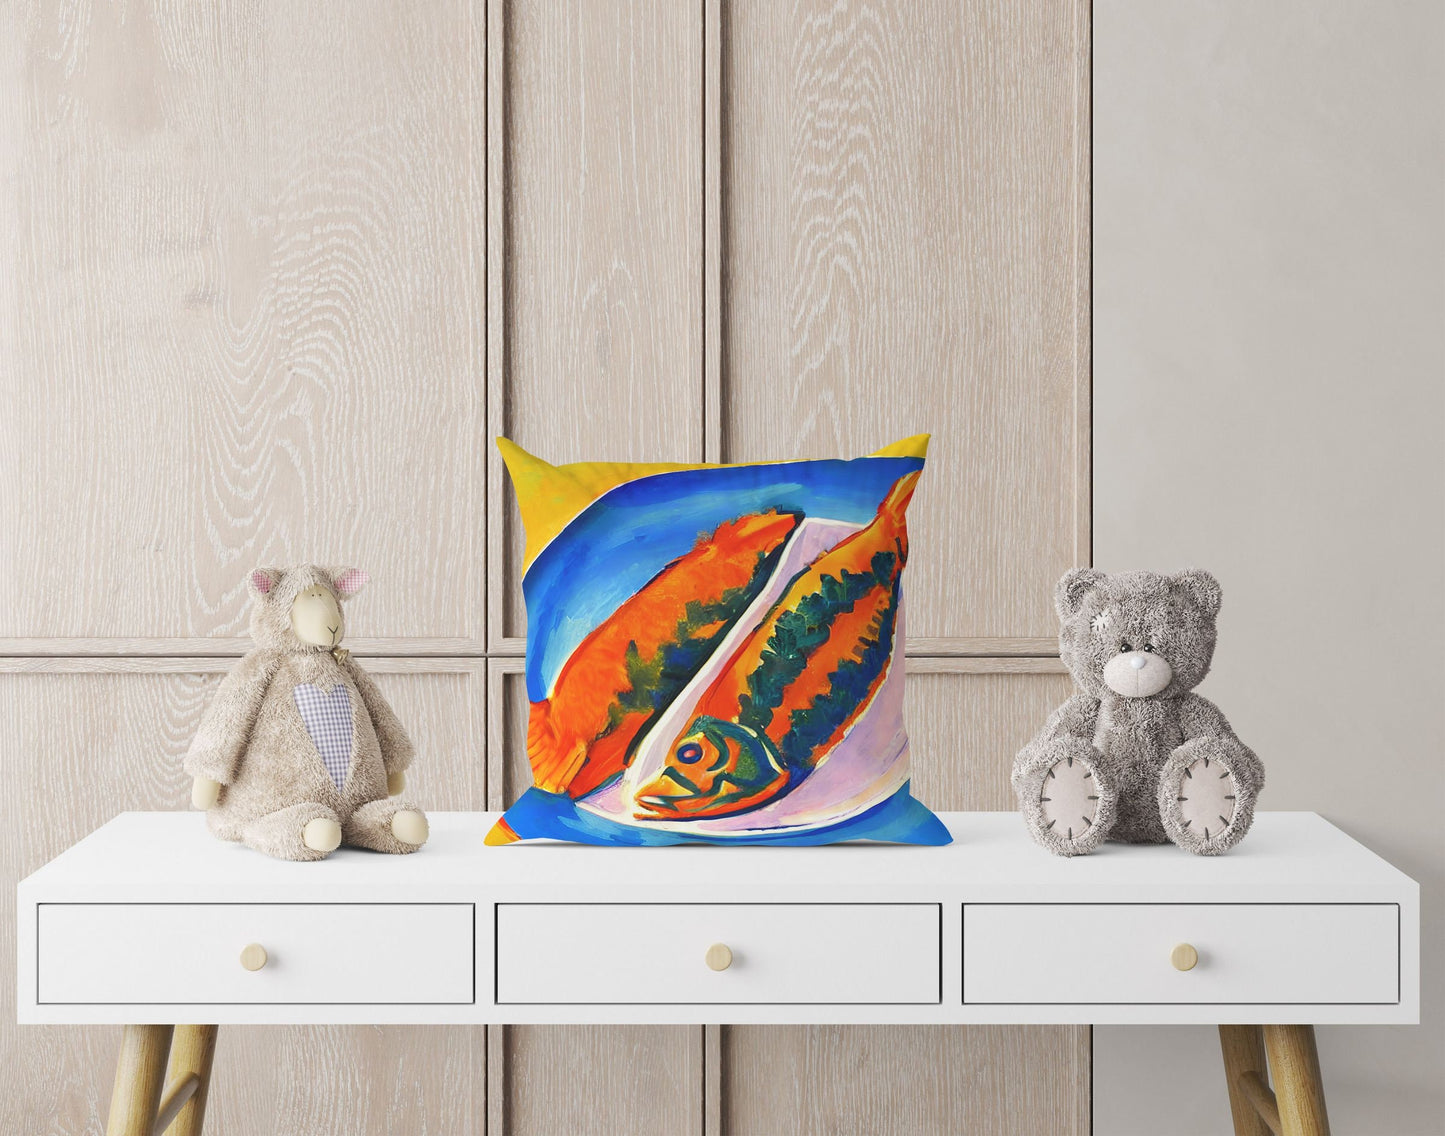 Pan-Fried Fishes Throw Pillow Cover, Abstract Pillow Case, Designer Pillow, Colorful Pillow Case, Housewarming Gift, Nursery Pillow